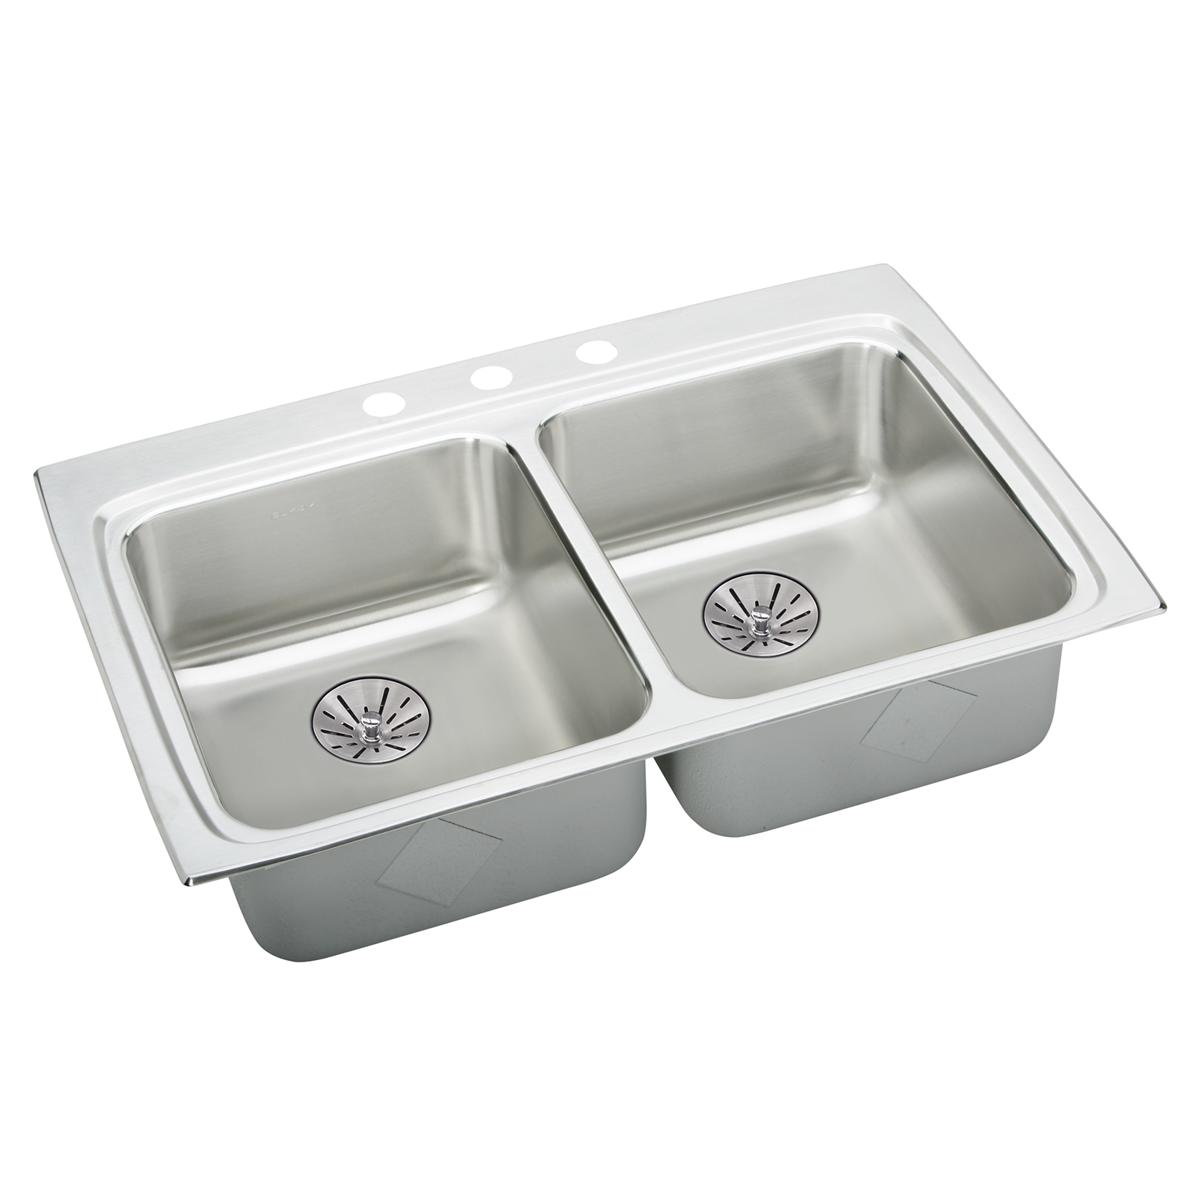 Elkay Lustertone Classic 33" x 22" x 6-1/2" Equal Double Bowl Drop-in ADA Sink with Perfect Drain and Quick-clip